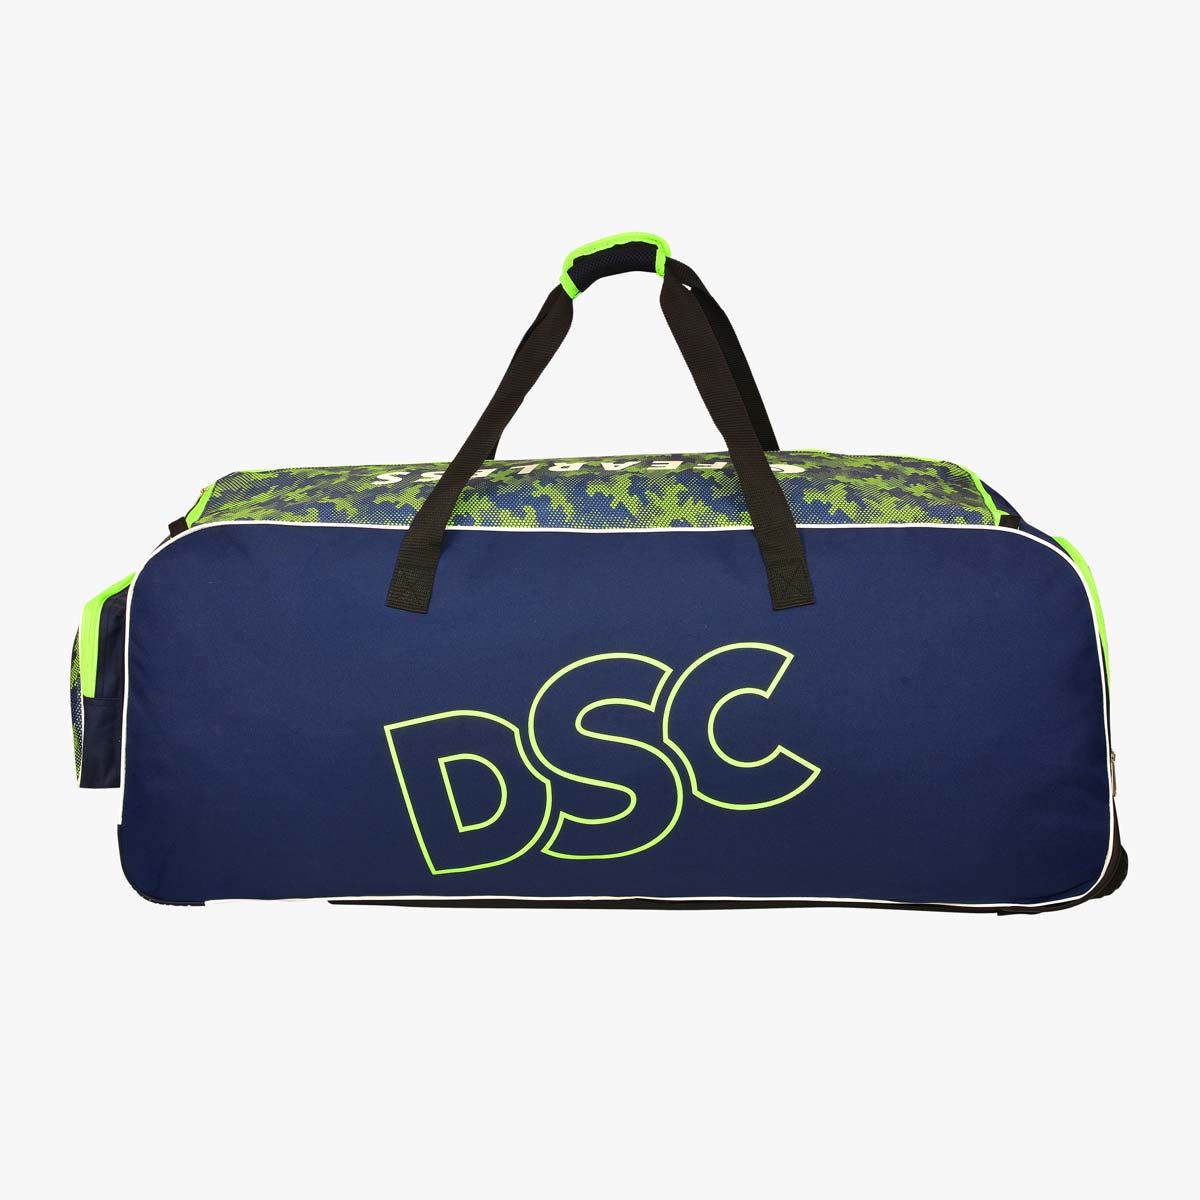 DSC kit bag with all equipments inside - Sports Equipment - 1723591439